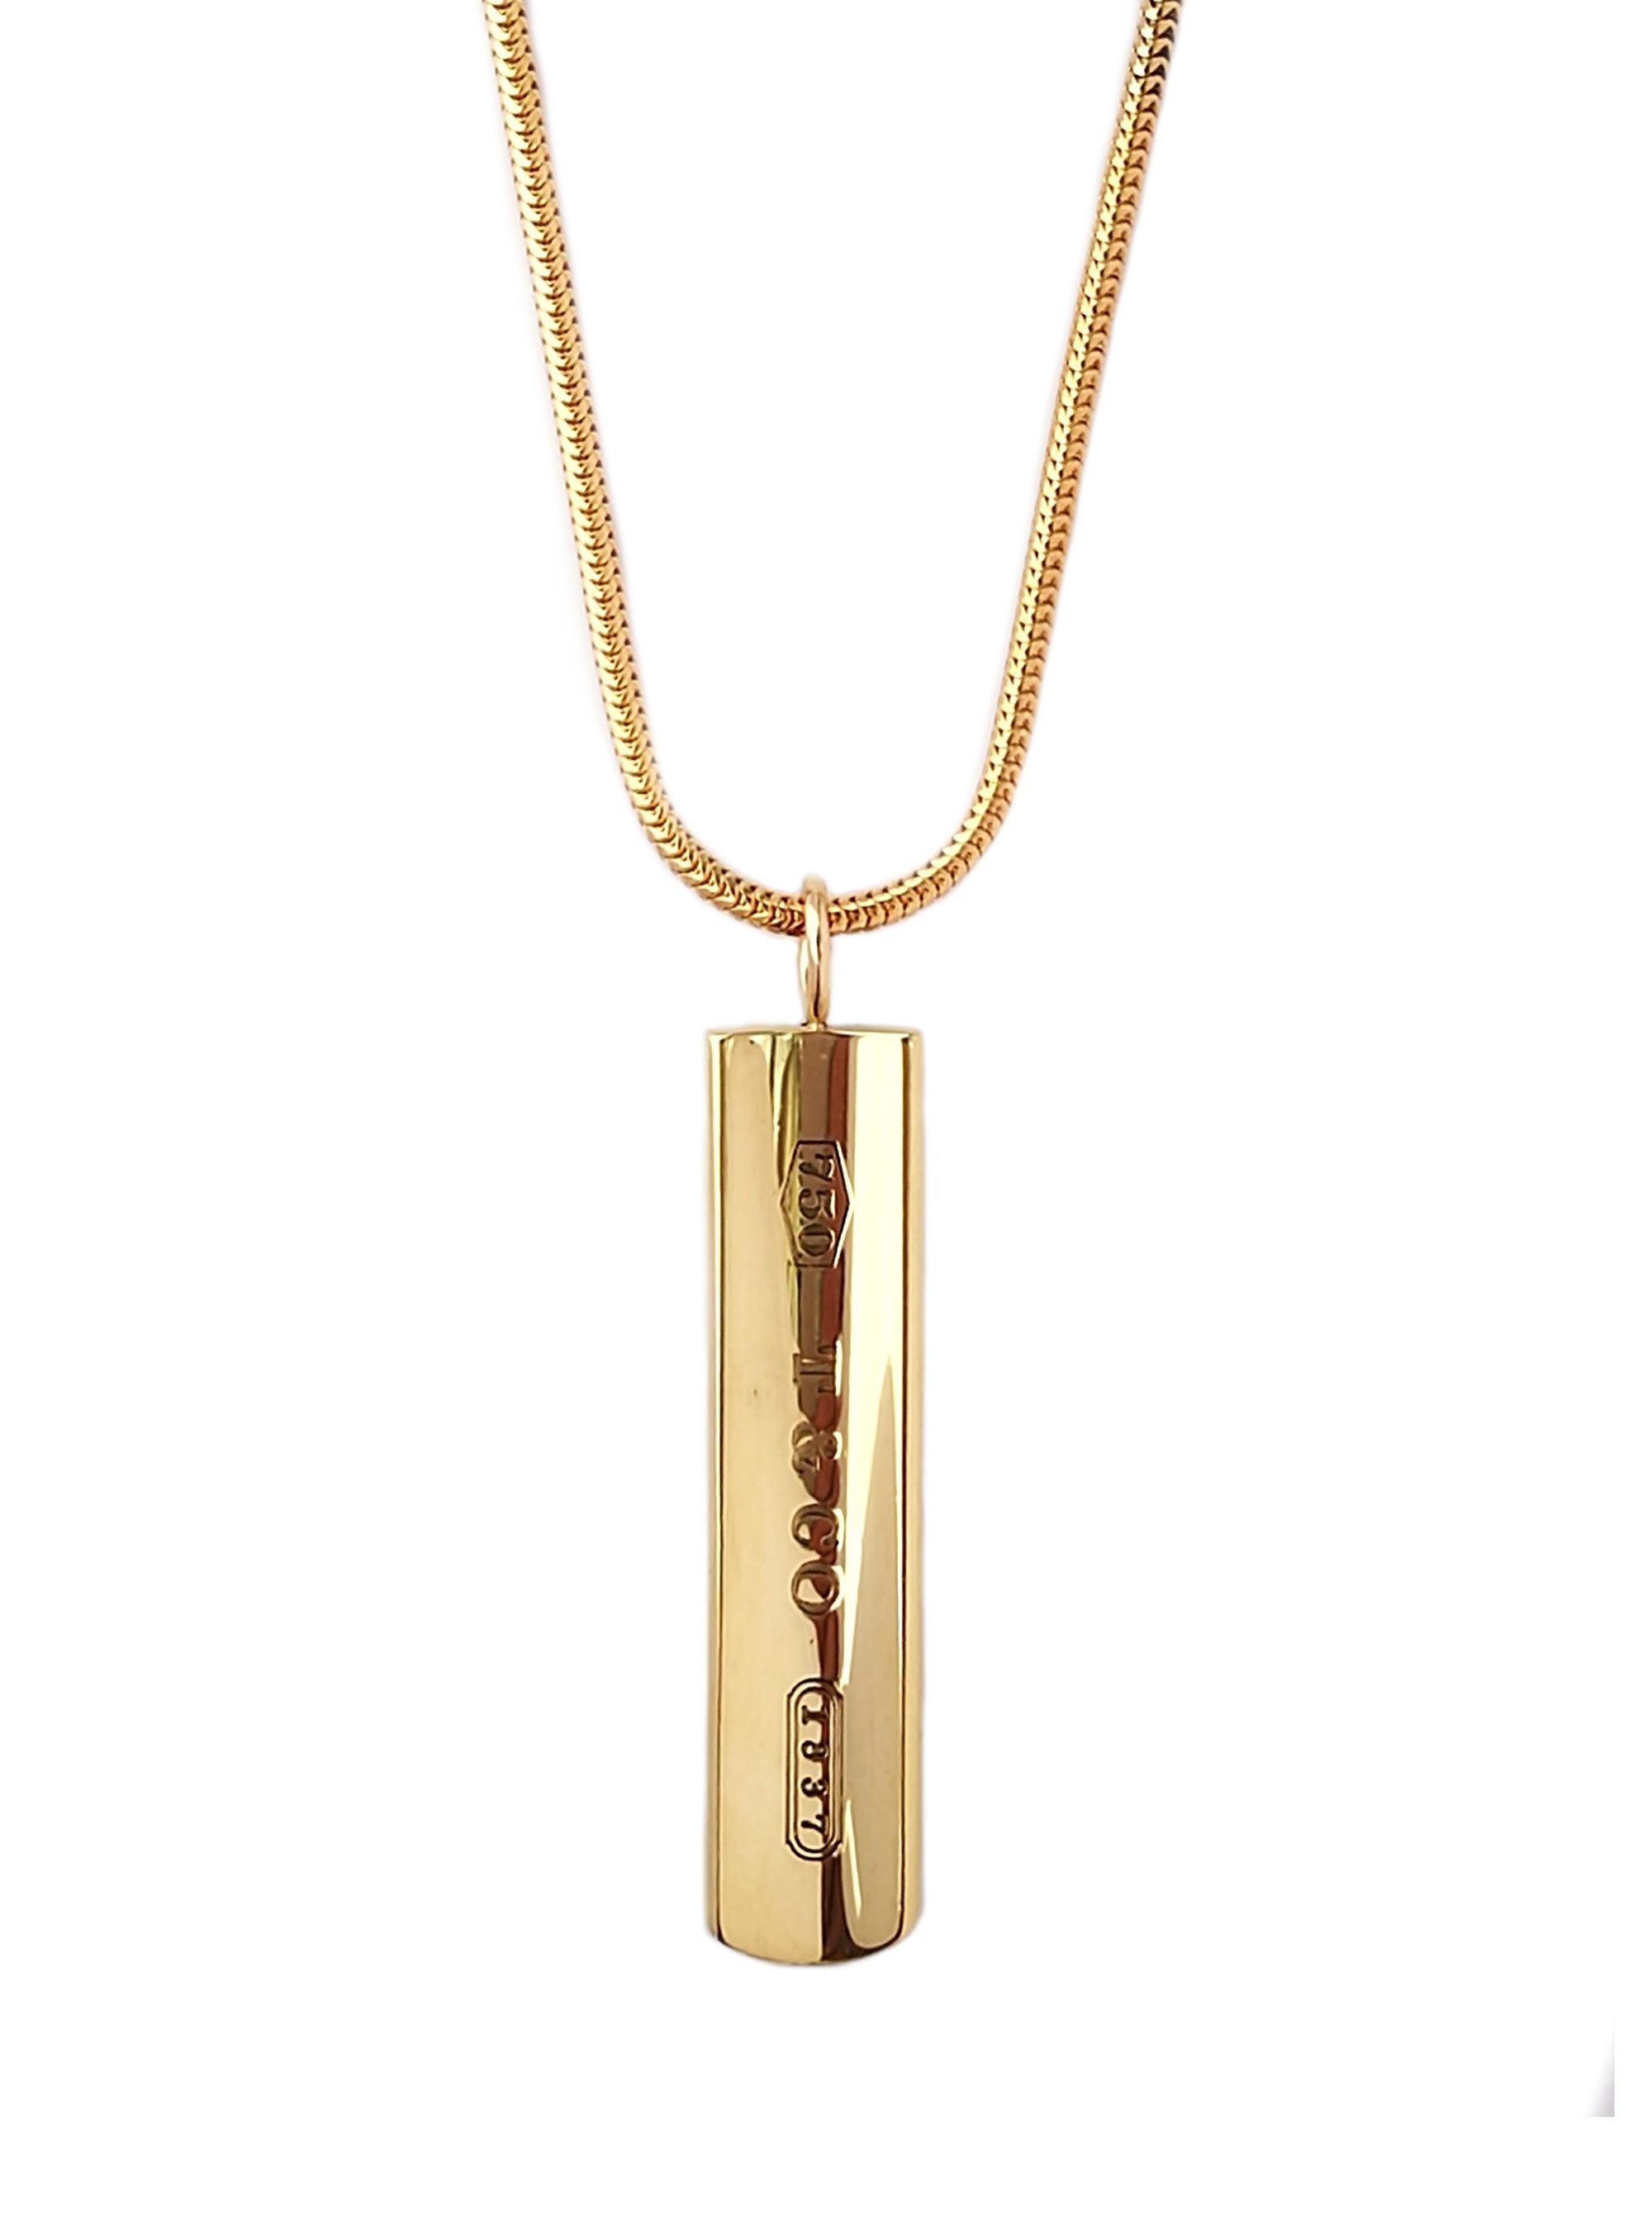 Tiffany & Co 1837 18k Yellow Gold Pendant Necklace 18in